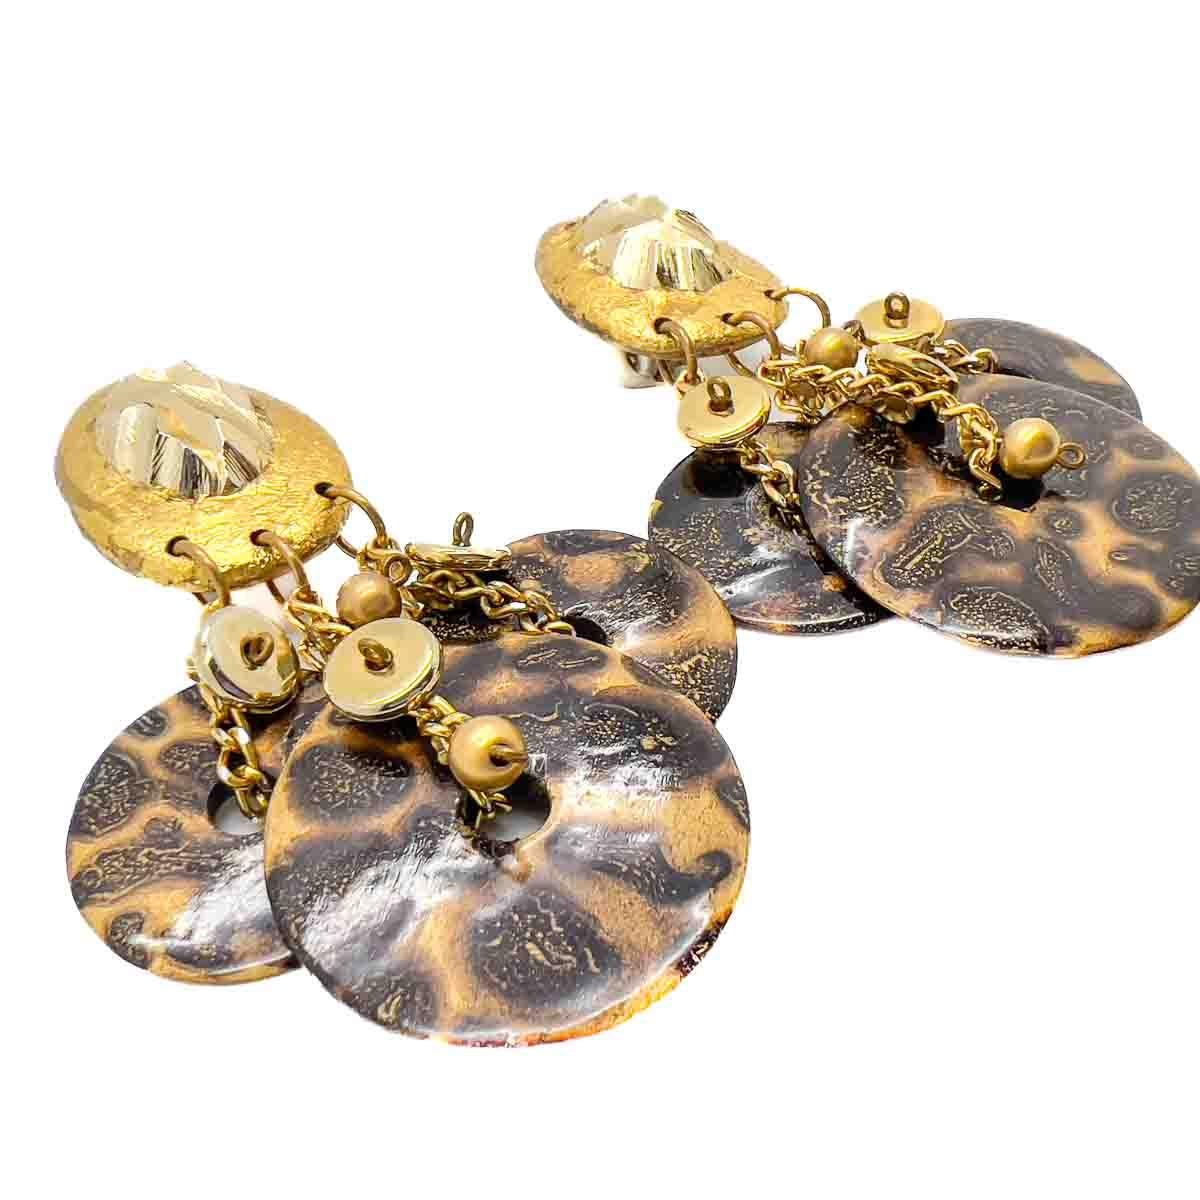 A pair of Vintage Ikarami Leopard Print Statement Earrings. Exotic golds and animal print browns and bronzes adorn these statement hand made earrings by Ikarami. The perfect accessory for timeless style.

Vintage Condition: Very good without damage